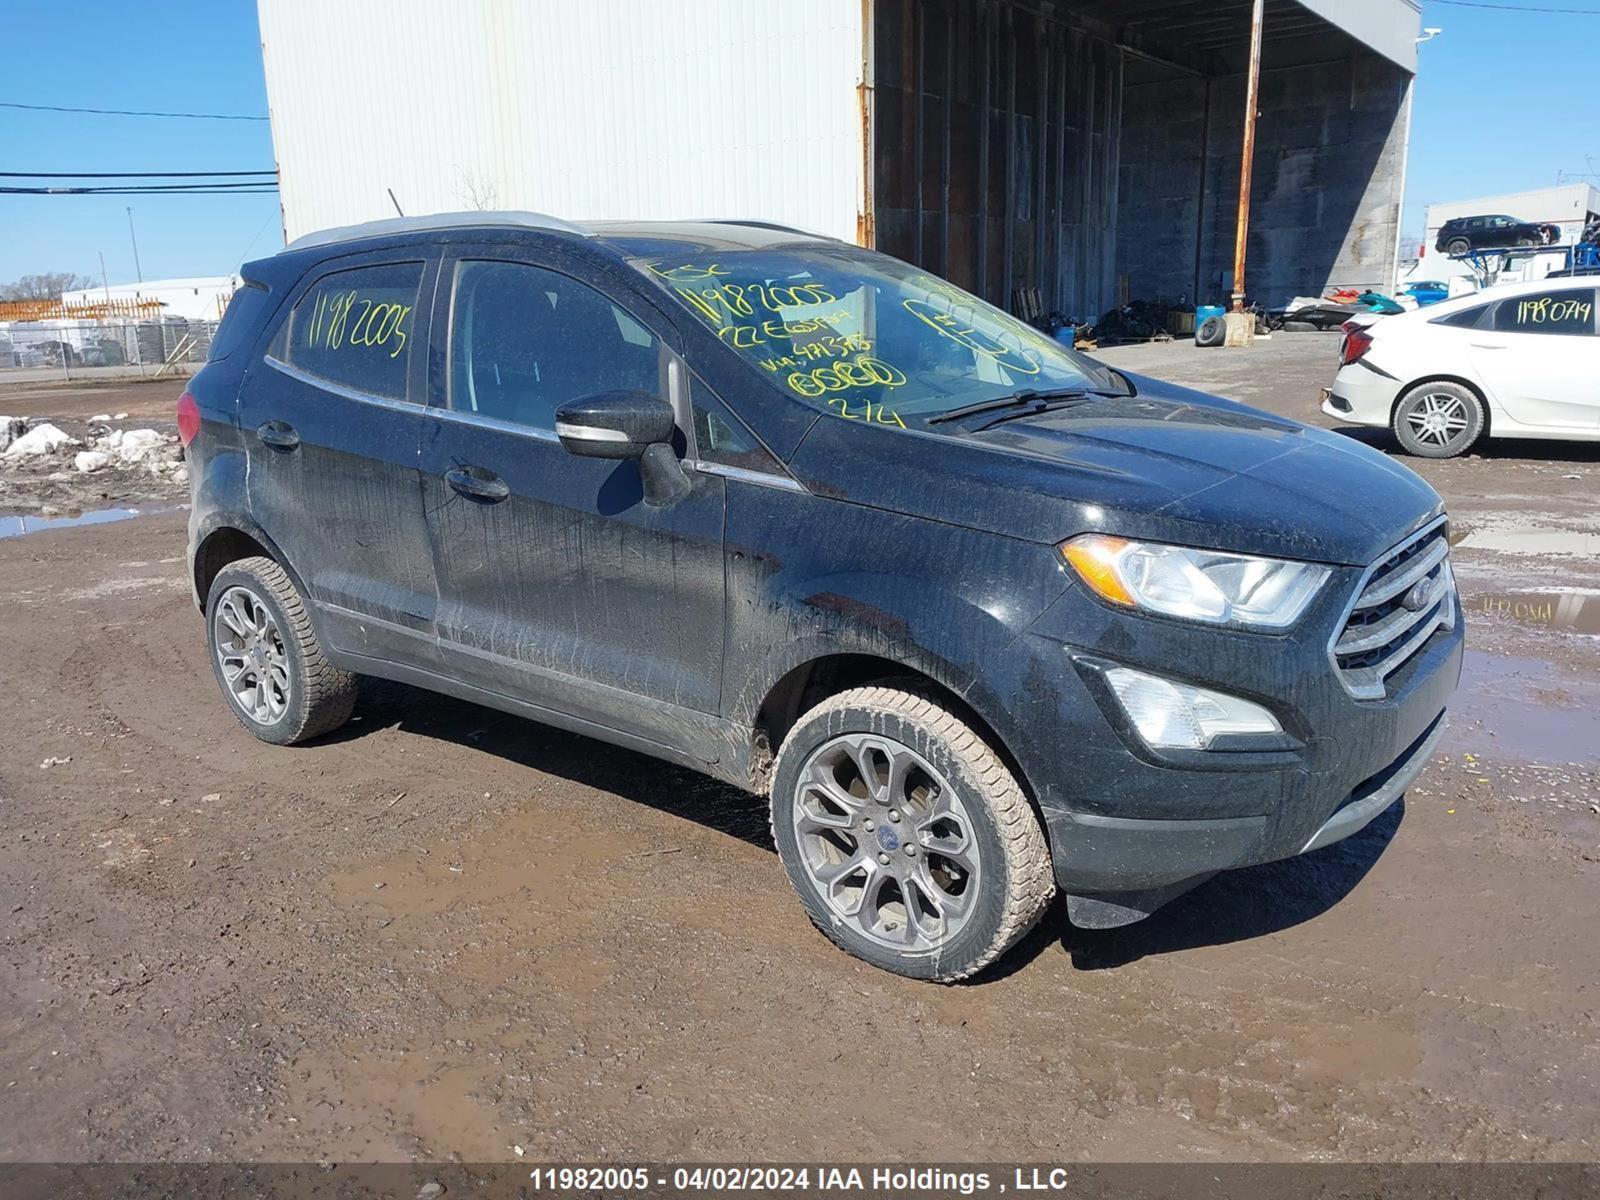 vin: MAJ6S3KL5NC471375 MAJ6S3KL5NC471375 2022 ford ecosport 2000 for Sale in g7a1a9, 1215 Industriel , St-Nicolas, Quebec, Canada